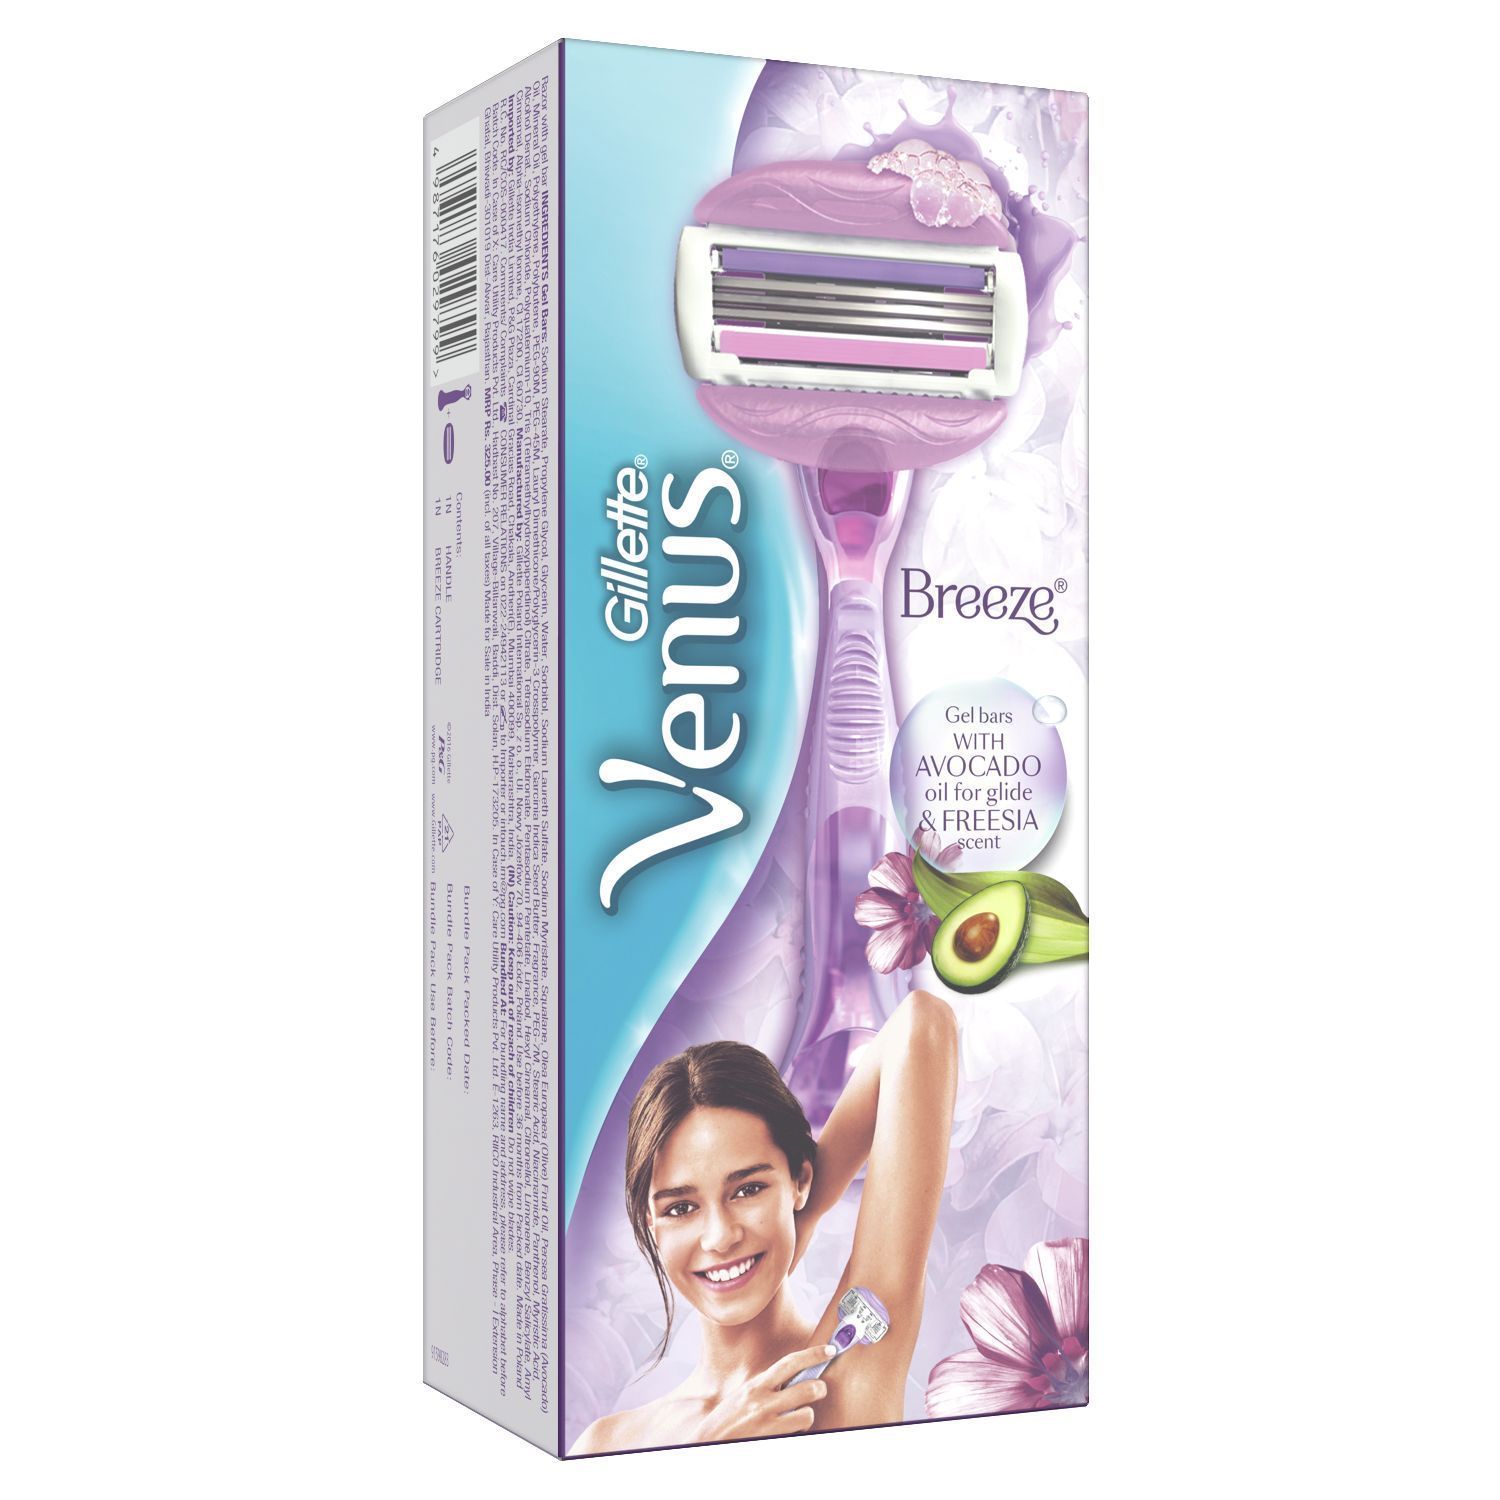 Gillette Venus + Fusion Manual Shaving & Haircare Diwali Kit For Him And Her